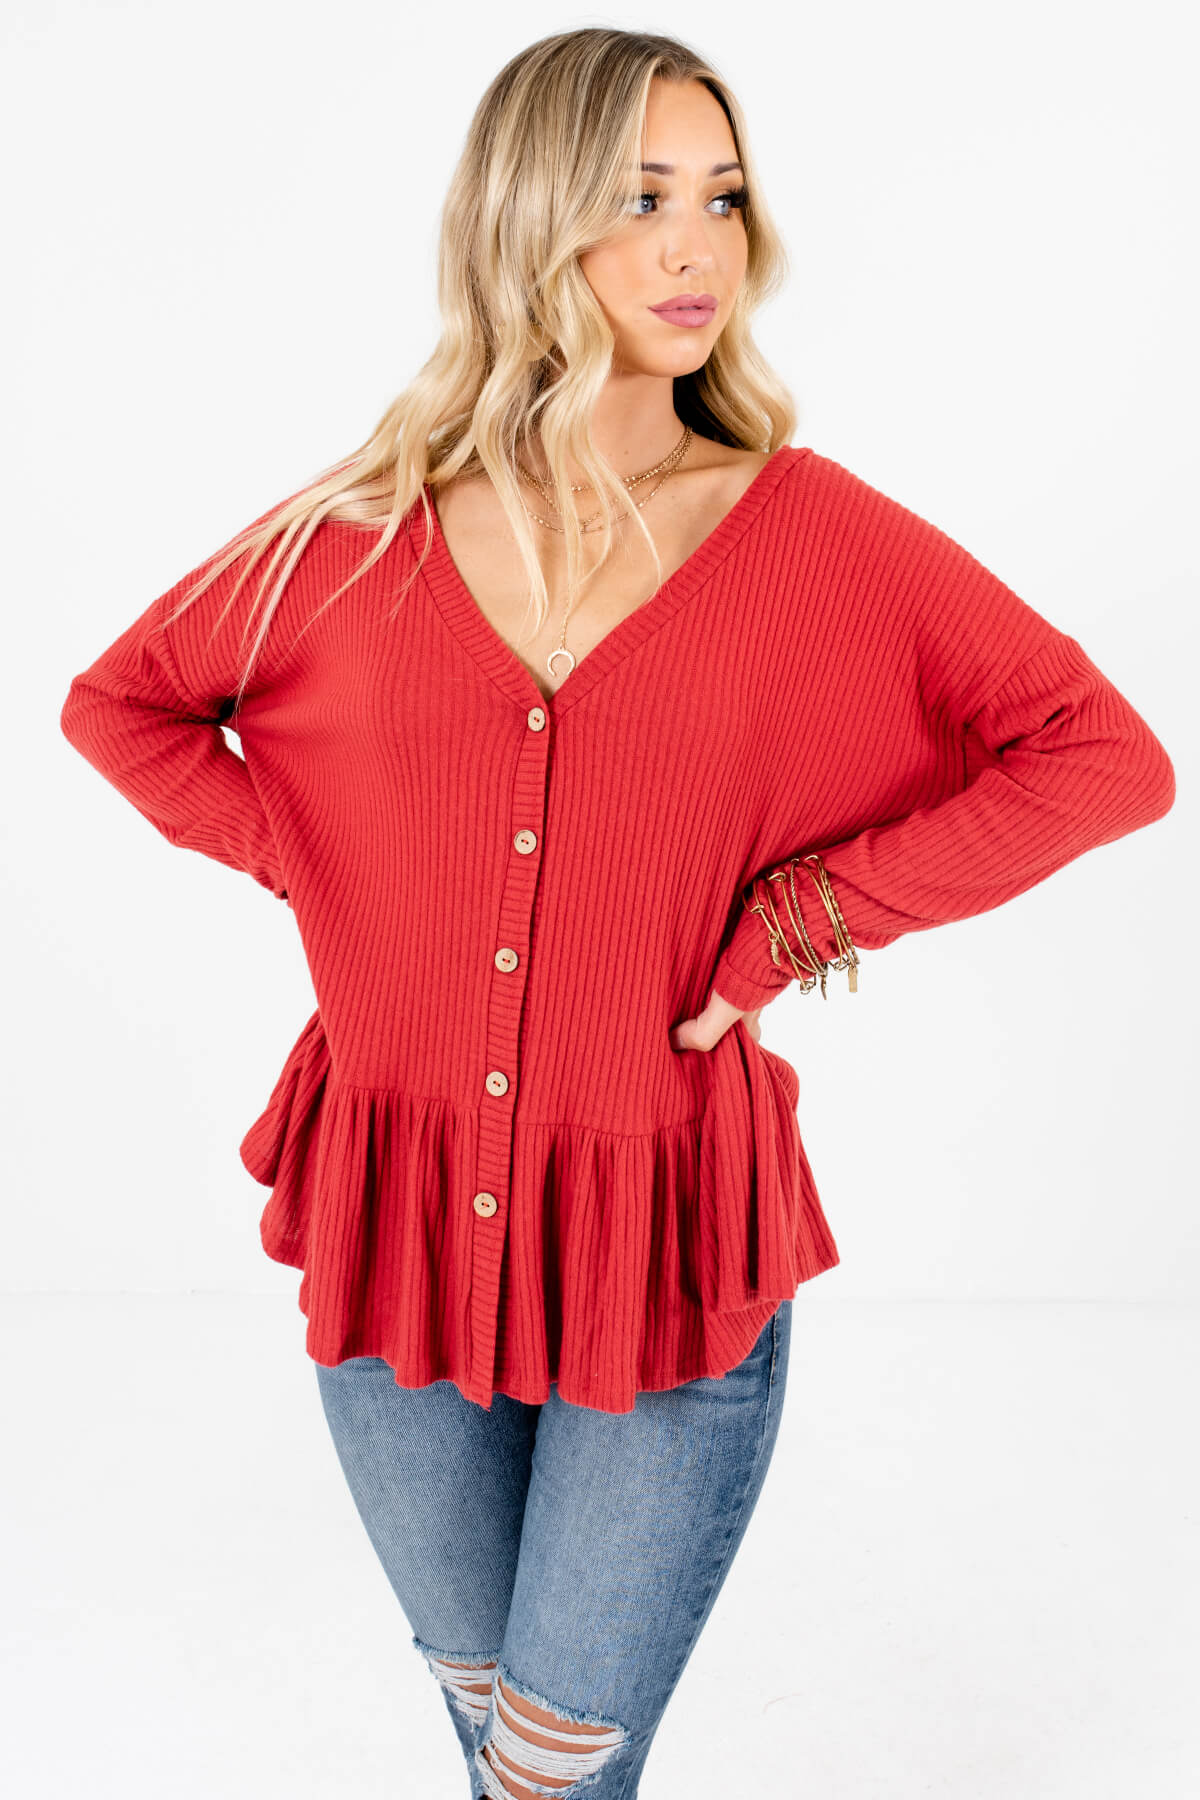 Women's Red Long Sleeve Boutique Tops